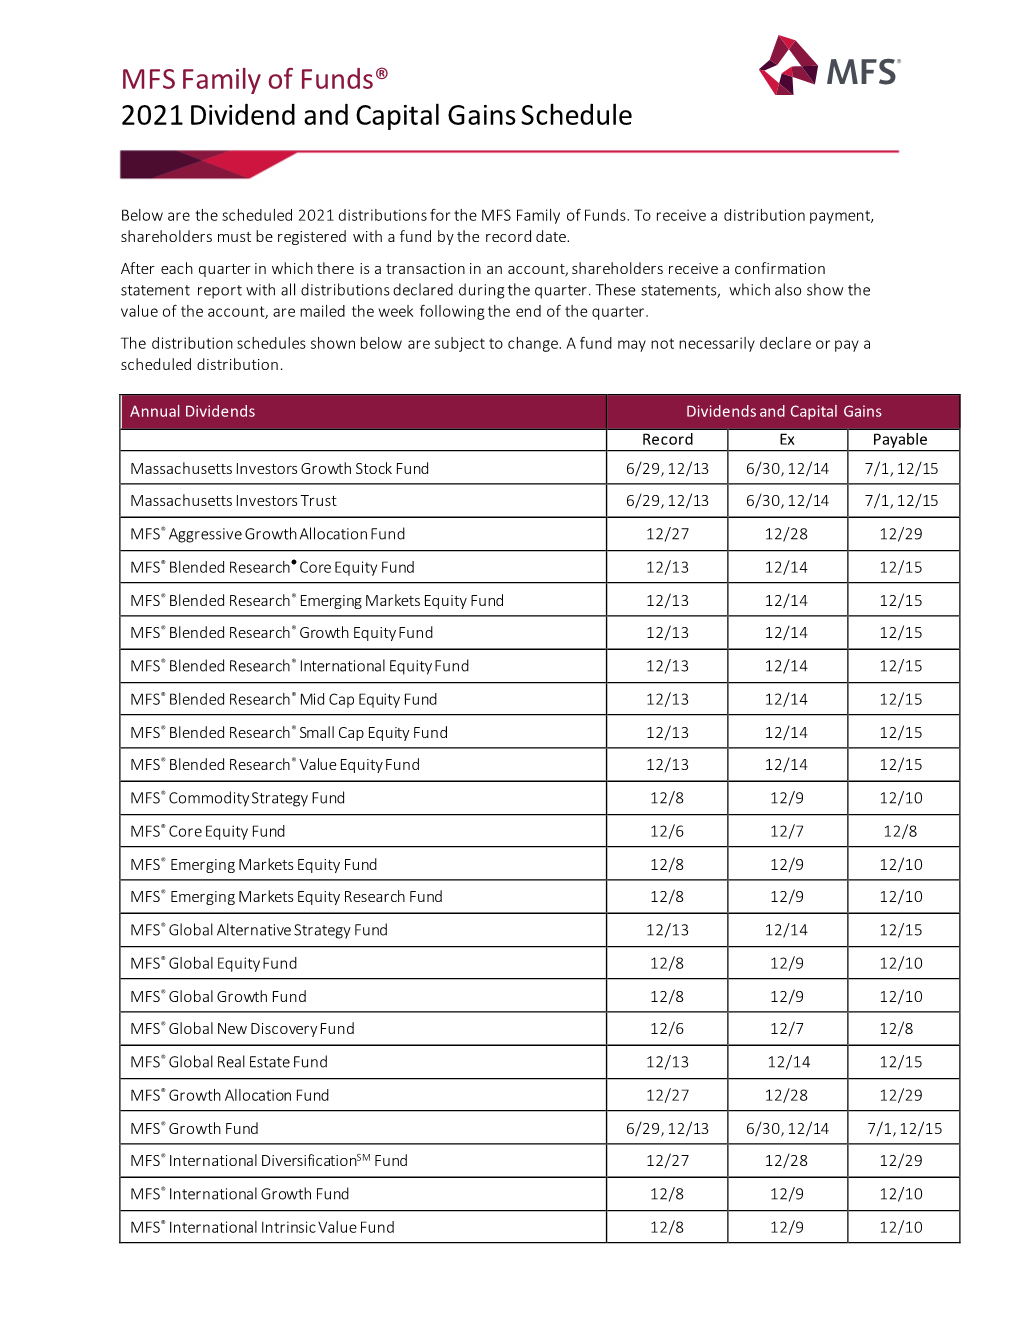 MFS Family of Funds® 2021 Dividend and Capital Gains Schedule